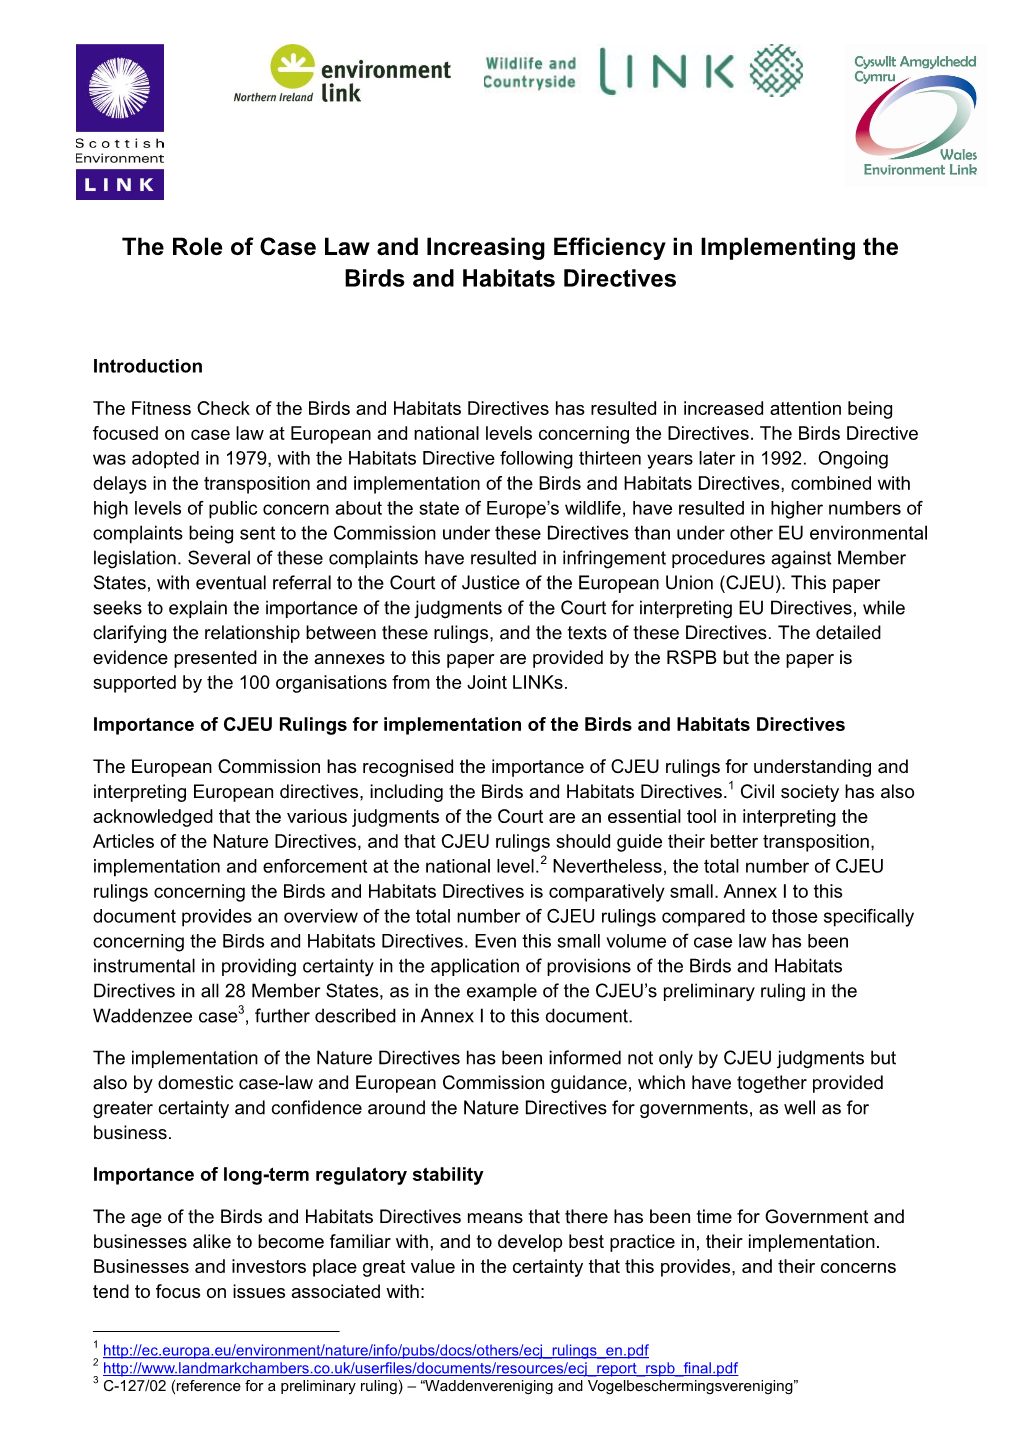 The Role of Case Law and Increasing Efficiency in Implementing the Birds and Habitats Directives